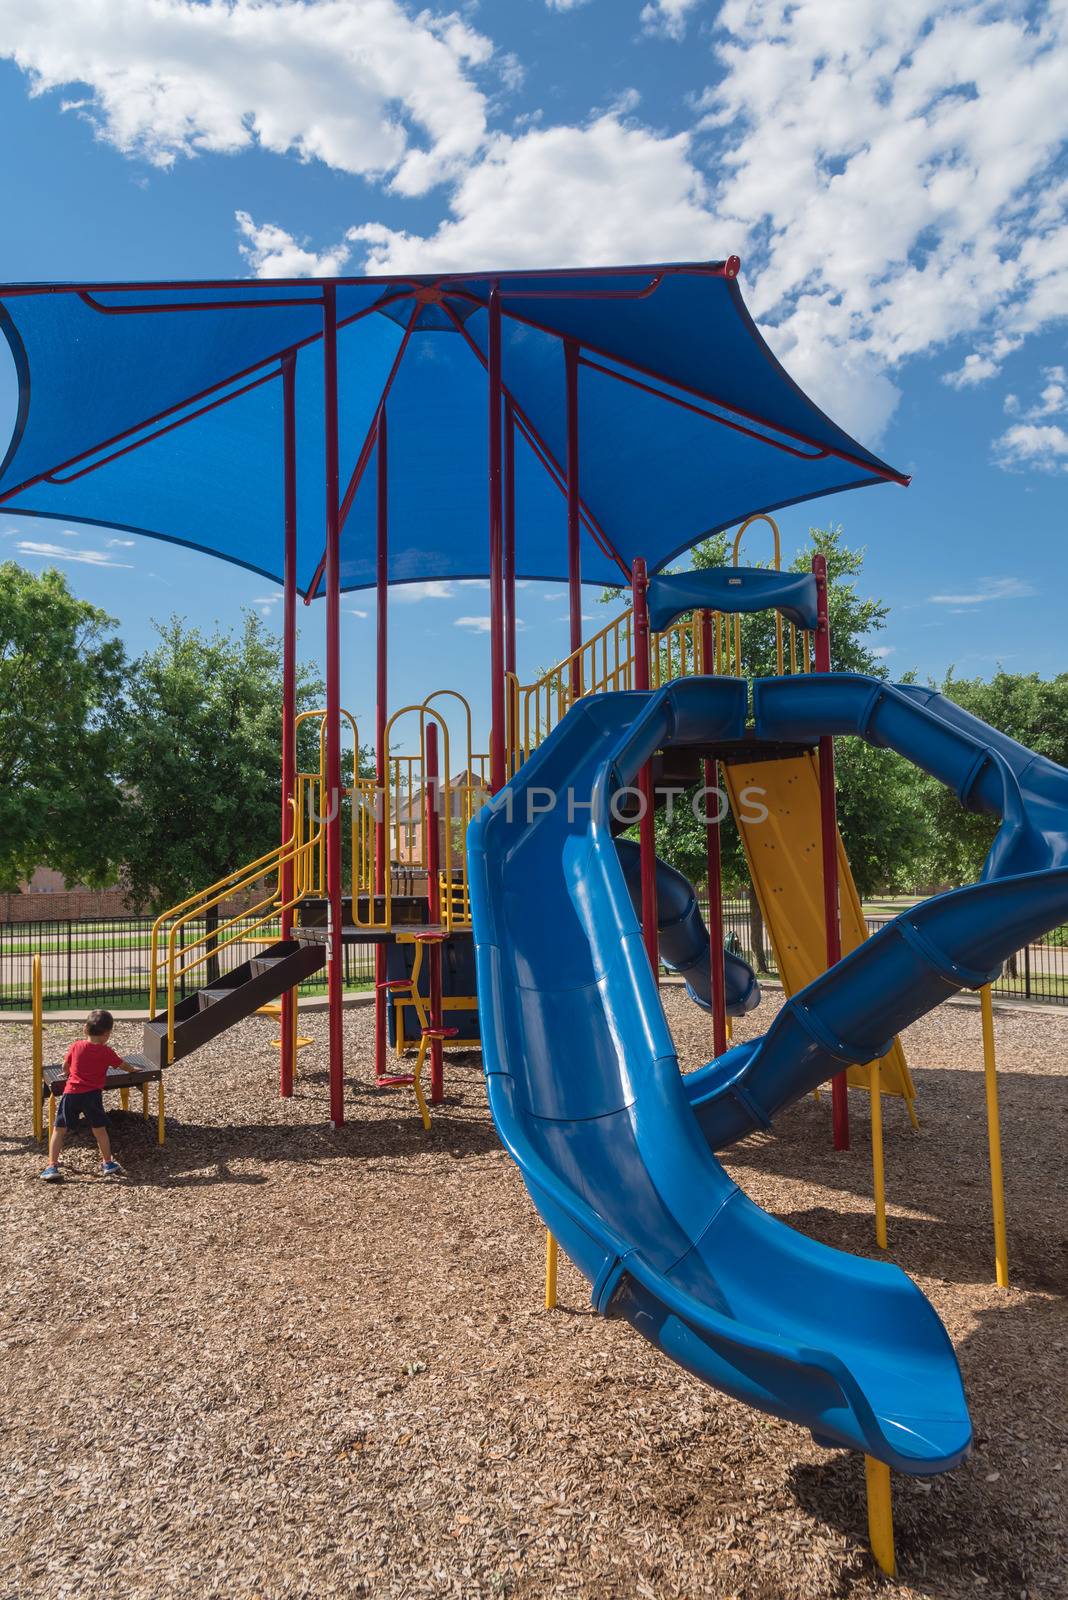 Neighborhood playground with kid playing on colorful structure equipment near Dallas by trongnguyen